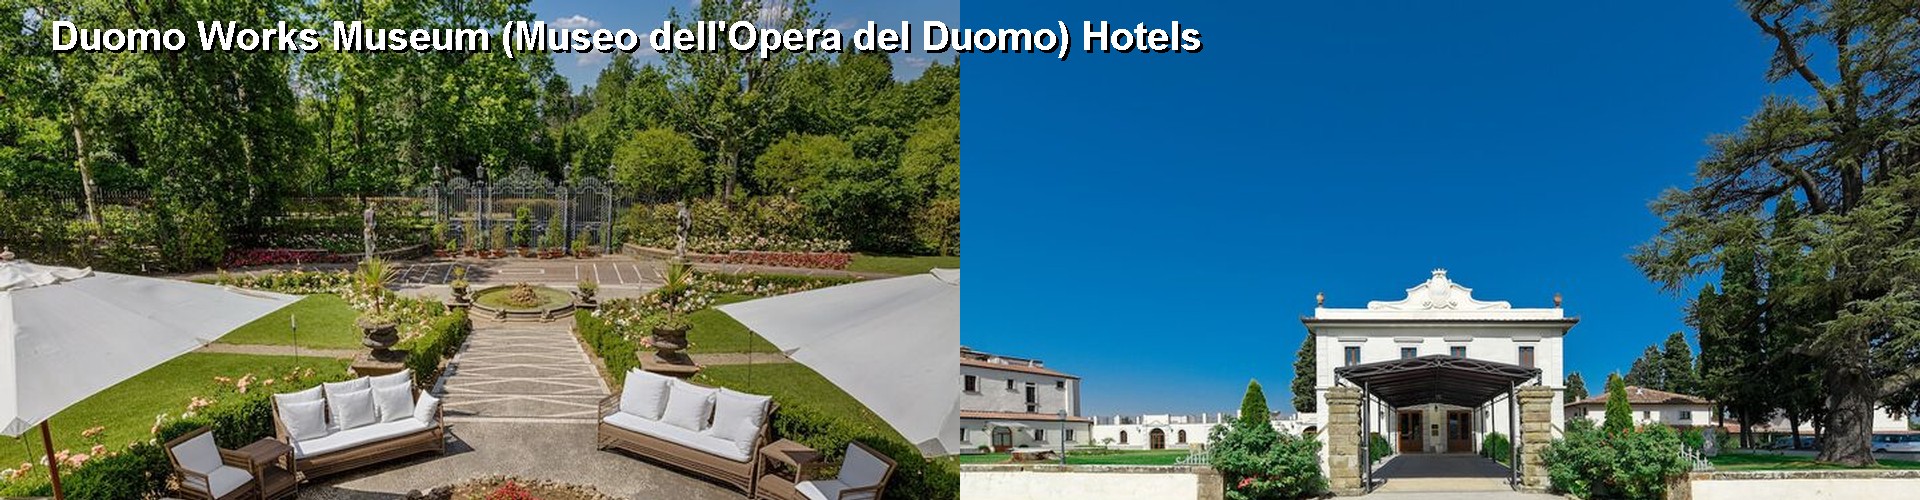 5 Best Hotels near Duomo Works Museum (Museo dell'Opera del Duomo)